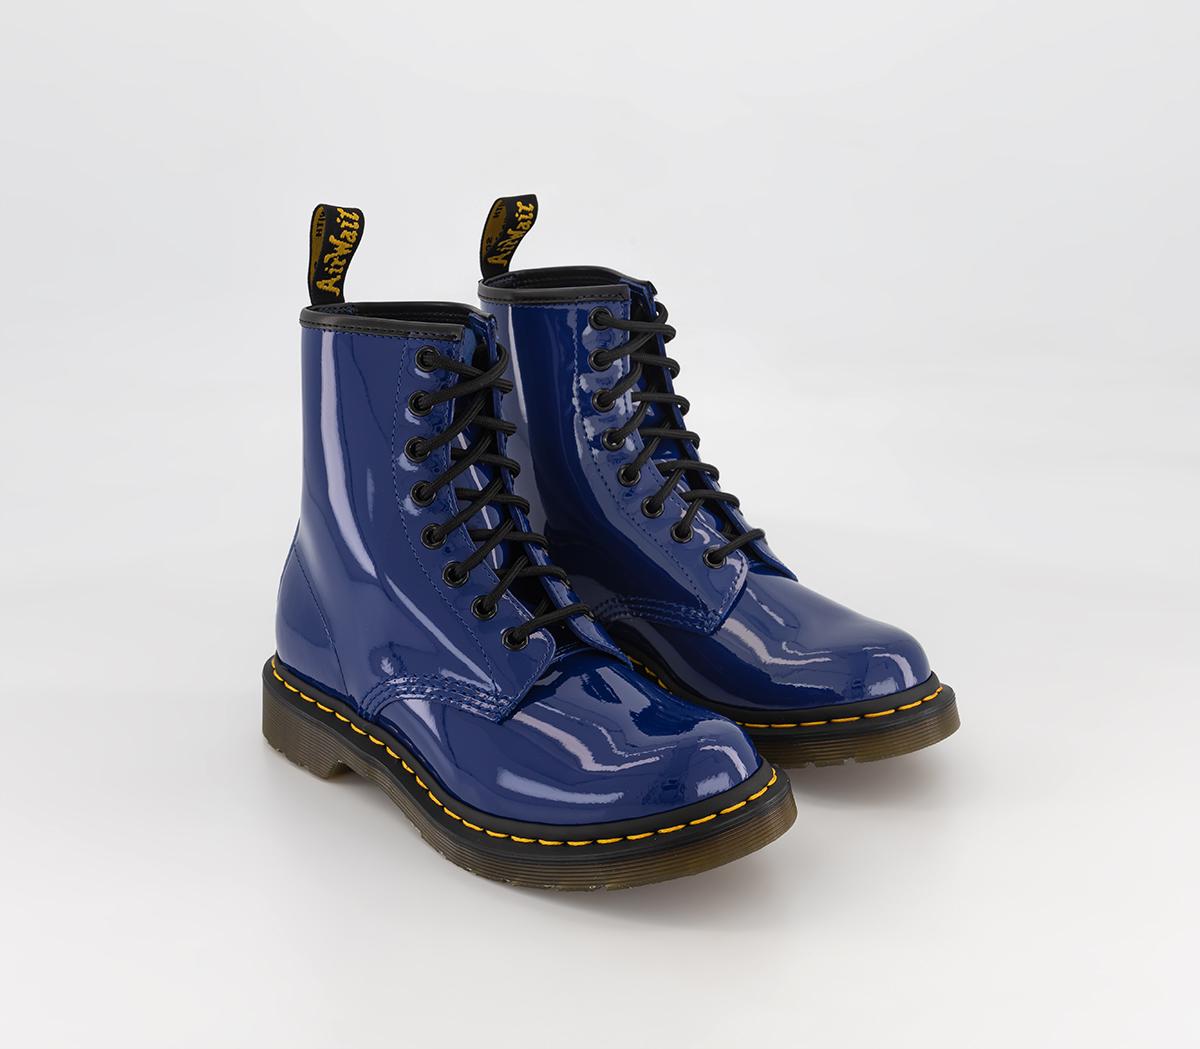 Dr. Martens Womens 8 Eyelet Lace Up Boots Blueprint Patent, 3